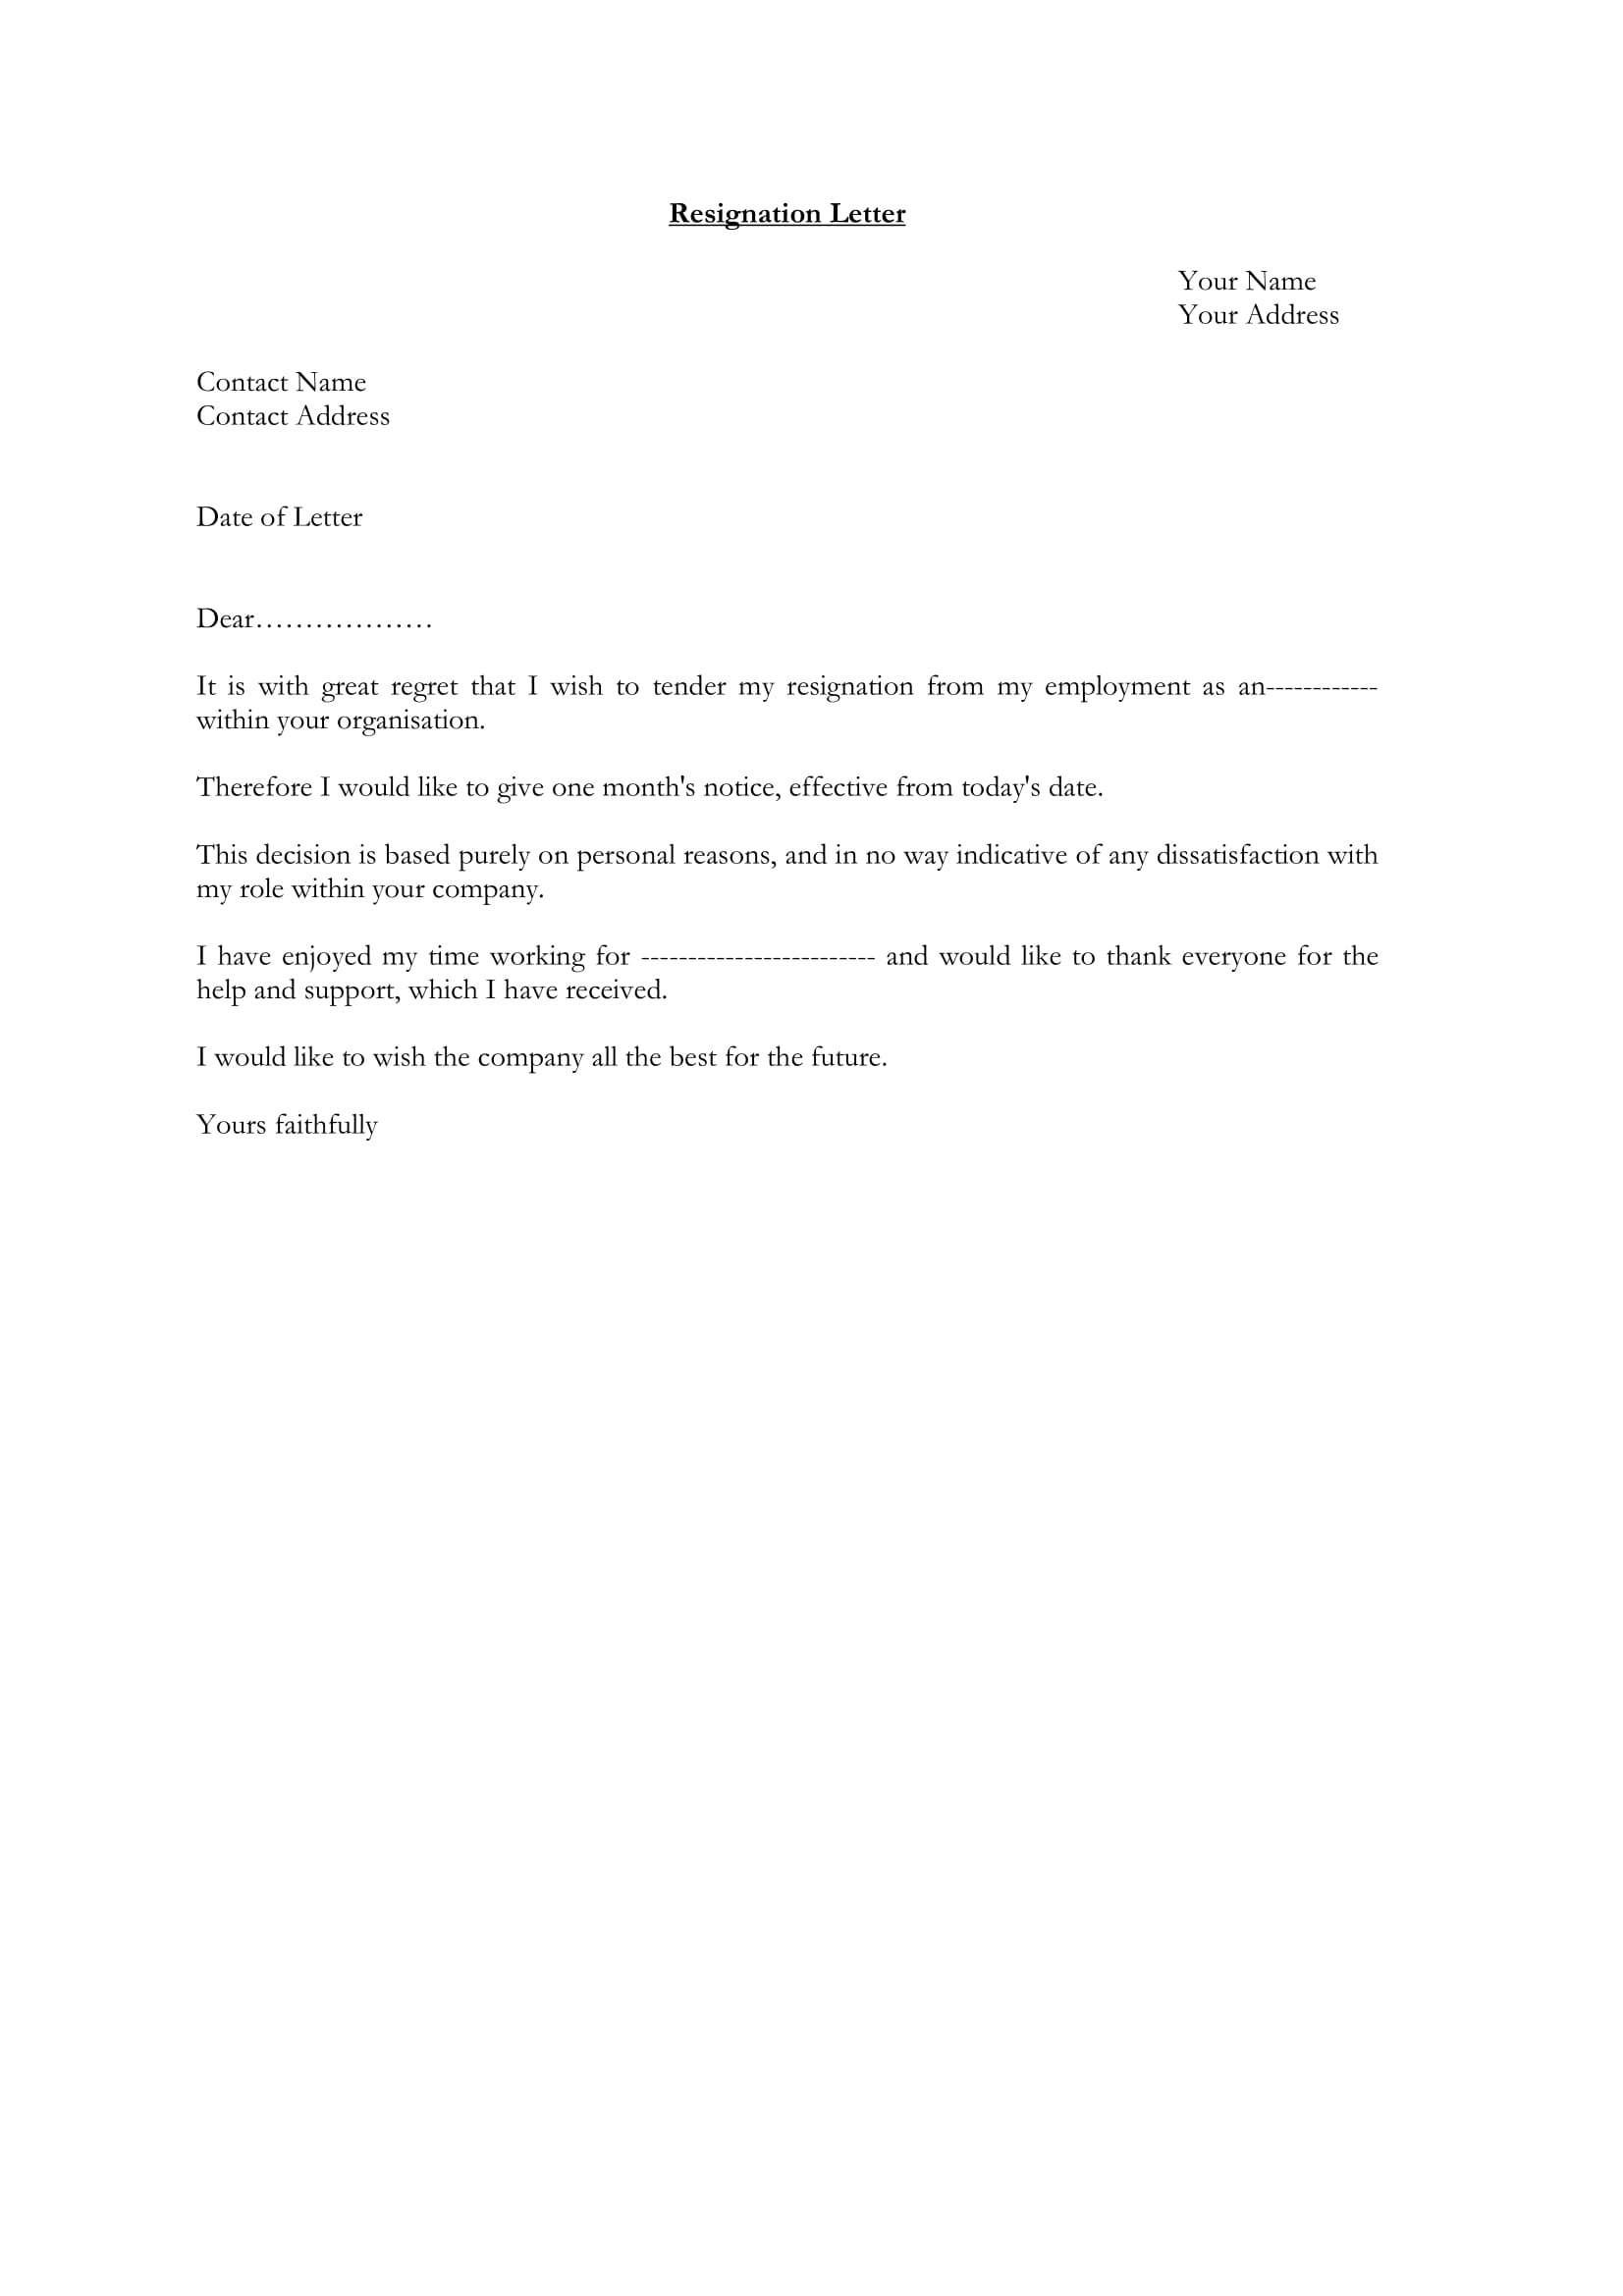 12+ Standard Resignation Letter Examples - PDF, Word | Examples